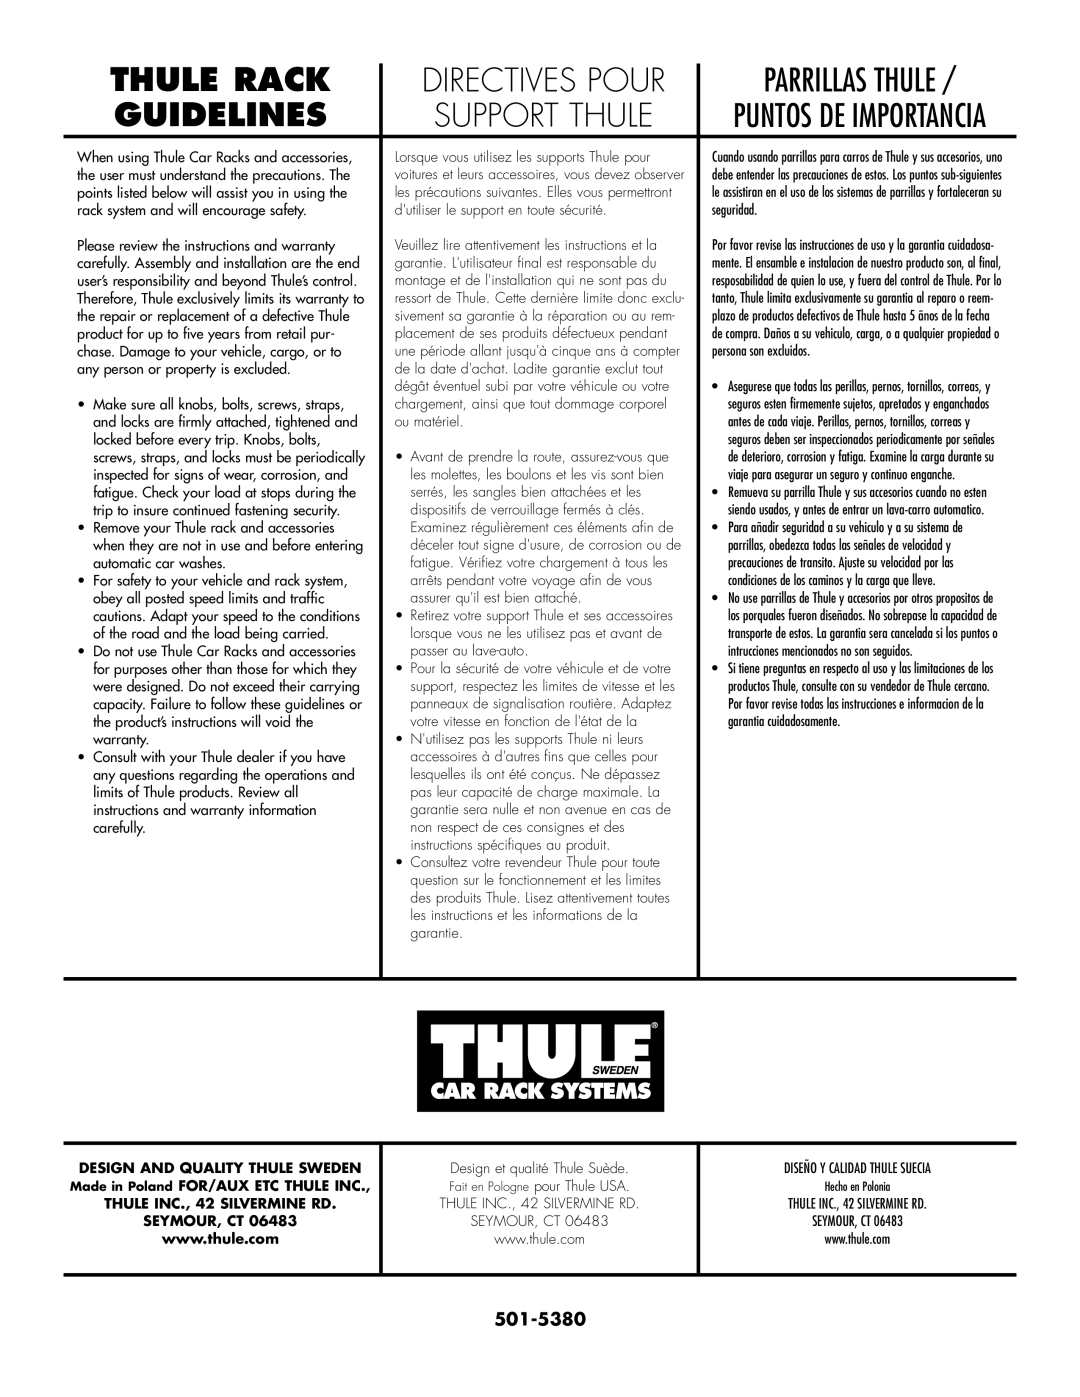 Thule 966 Thule Rack, Guidelines, 501-5380, Design And Quality Thule Sweden, Design et qualité Thule Suède, Seymour, Ct 